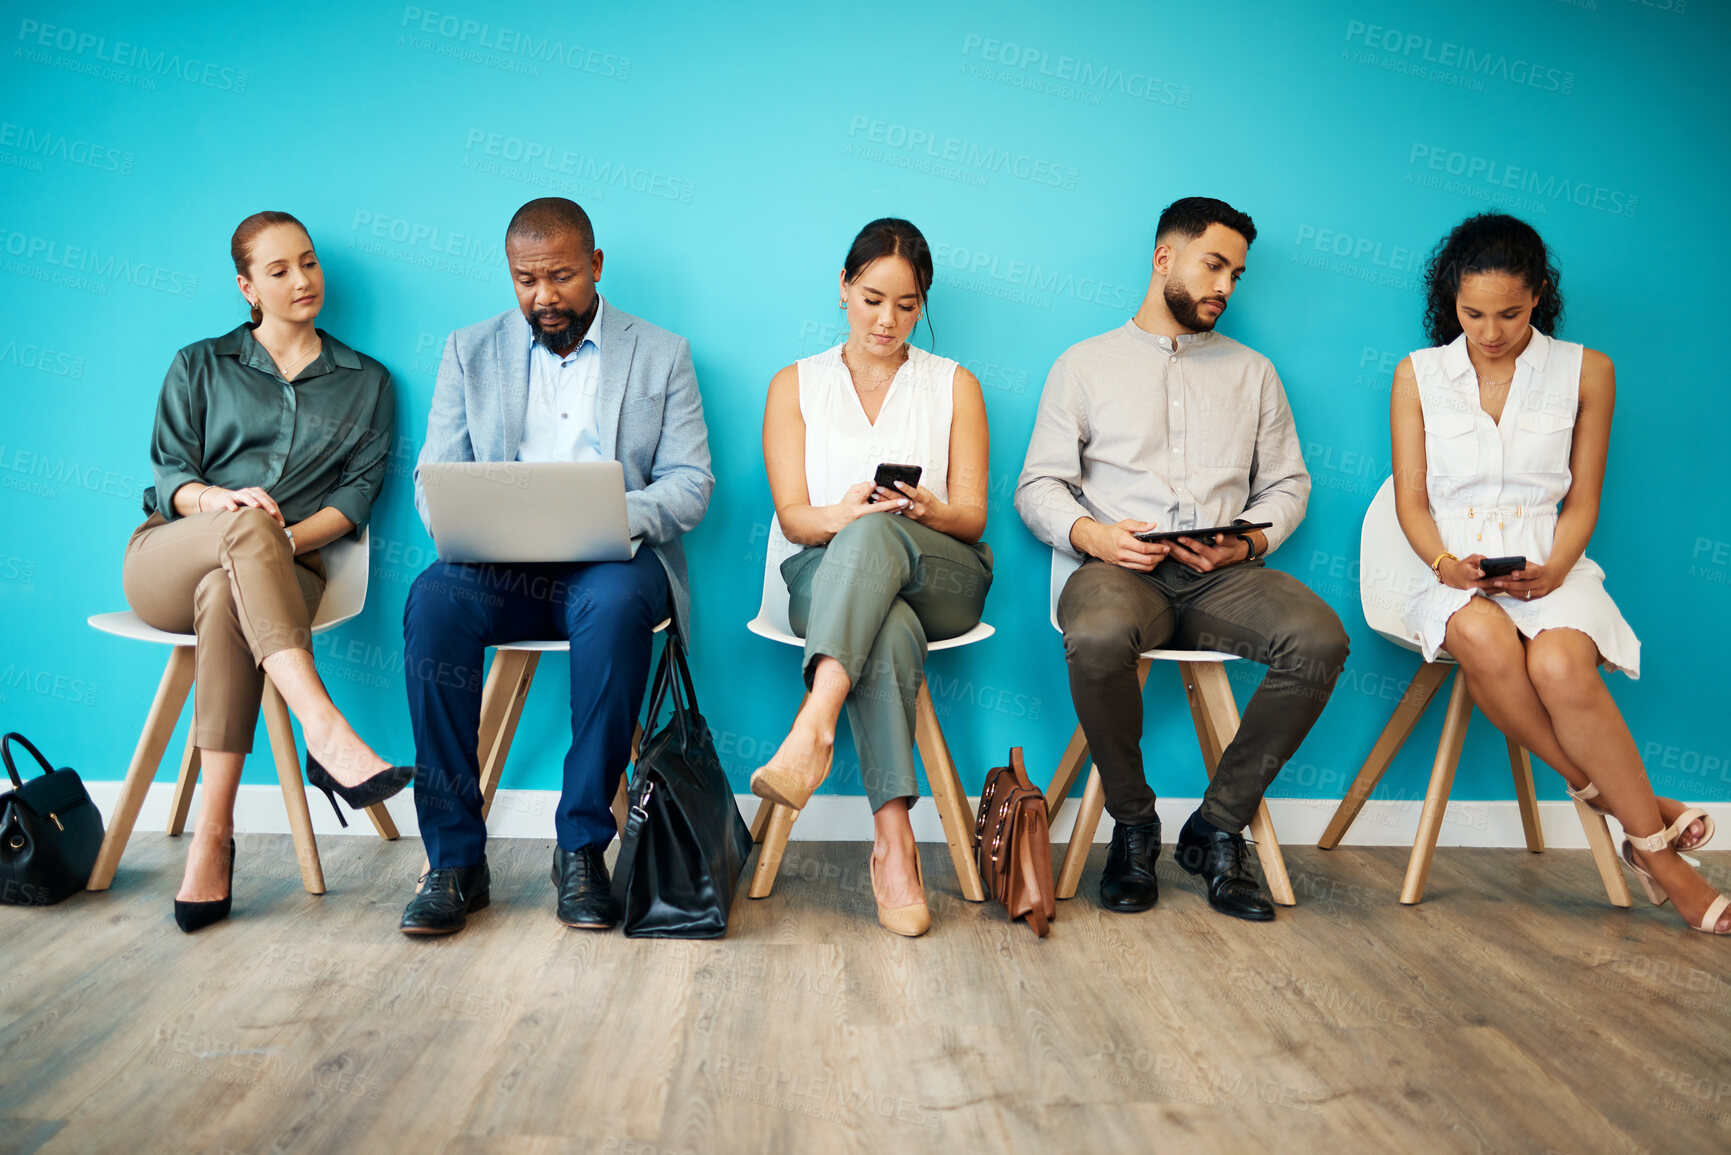 Buy stock photo Full length shot of a diverse group of businesspeople sitting together in the office and using technology